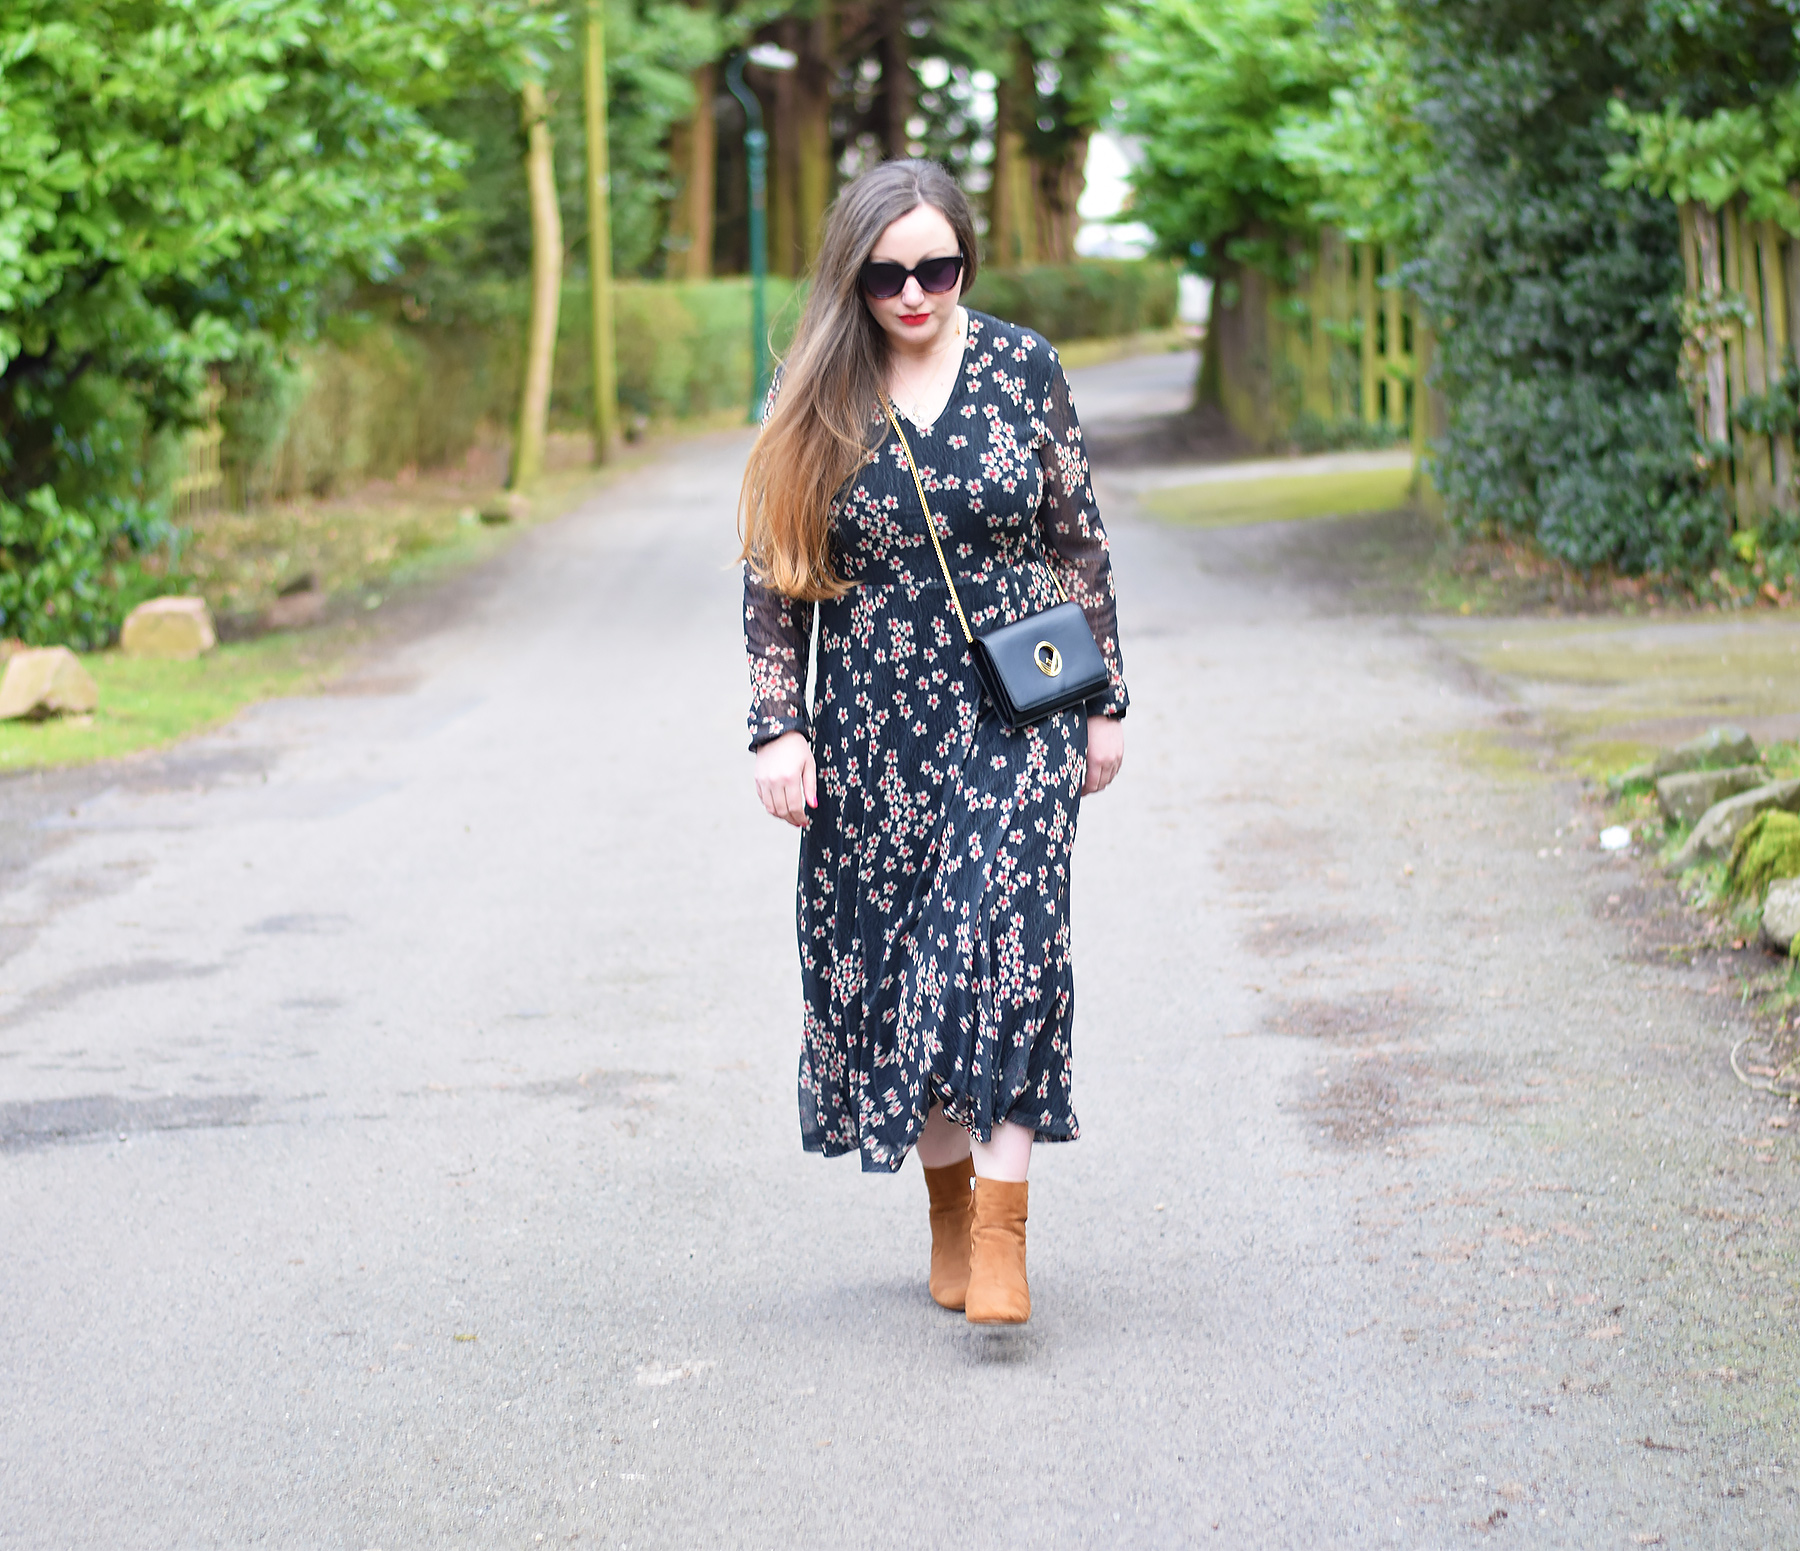 Winter maxi dress and ankle boots outfit